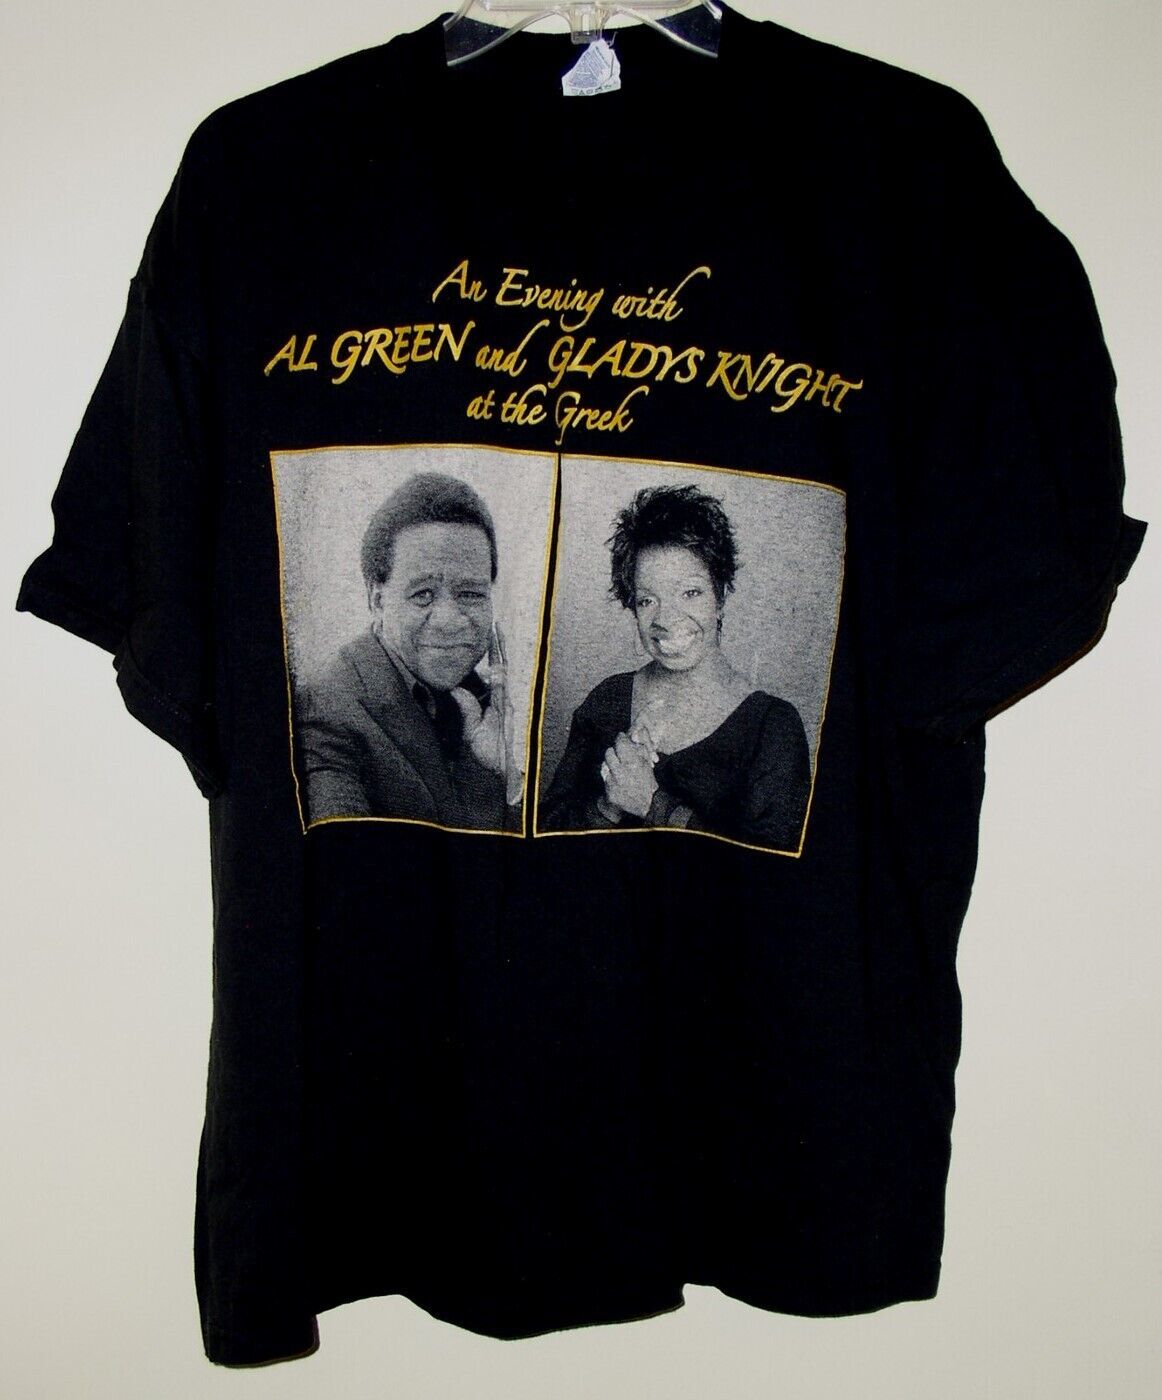 Primary image for Al Green Gladys Knight Concert Shirt Vintage 2008 At The Greek Size X-Large